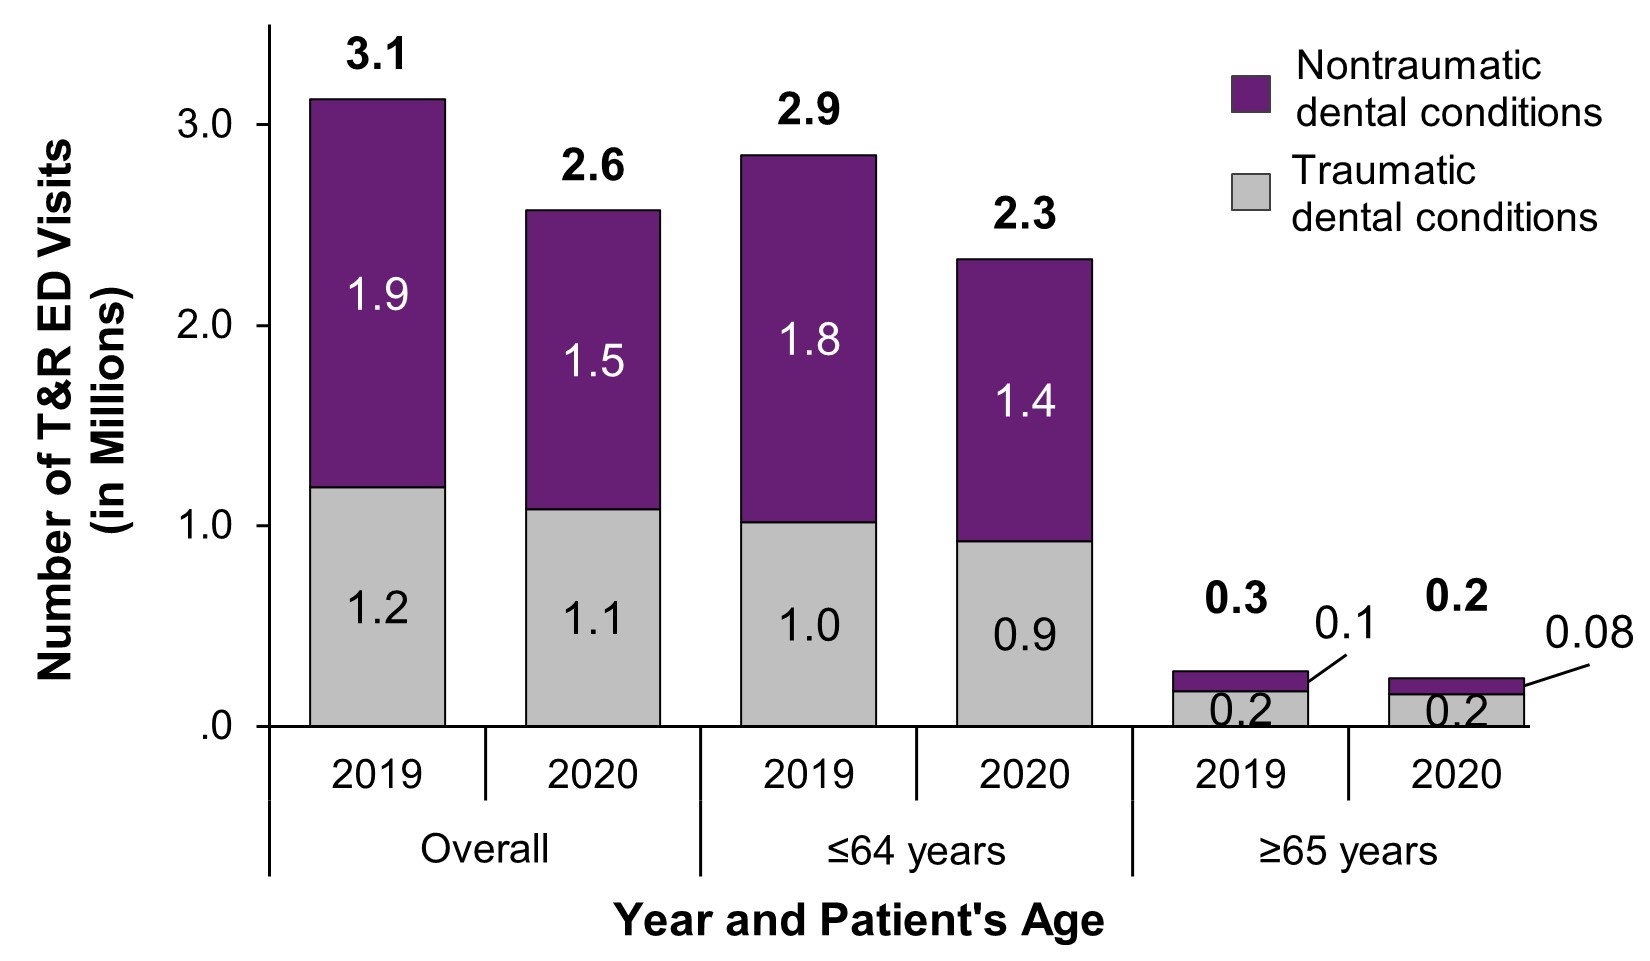 Number of treat-and-release ED visits for dental conditions in millions, overall and by age group and traumatic vs. nontraumatic conditions, 2019 and 2020